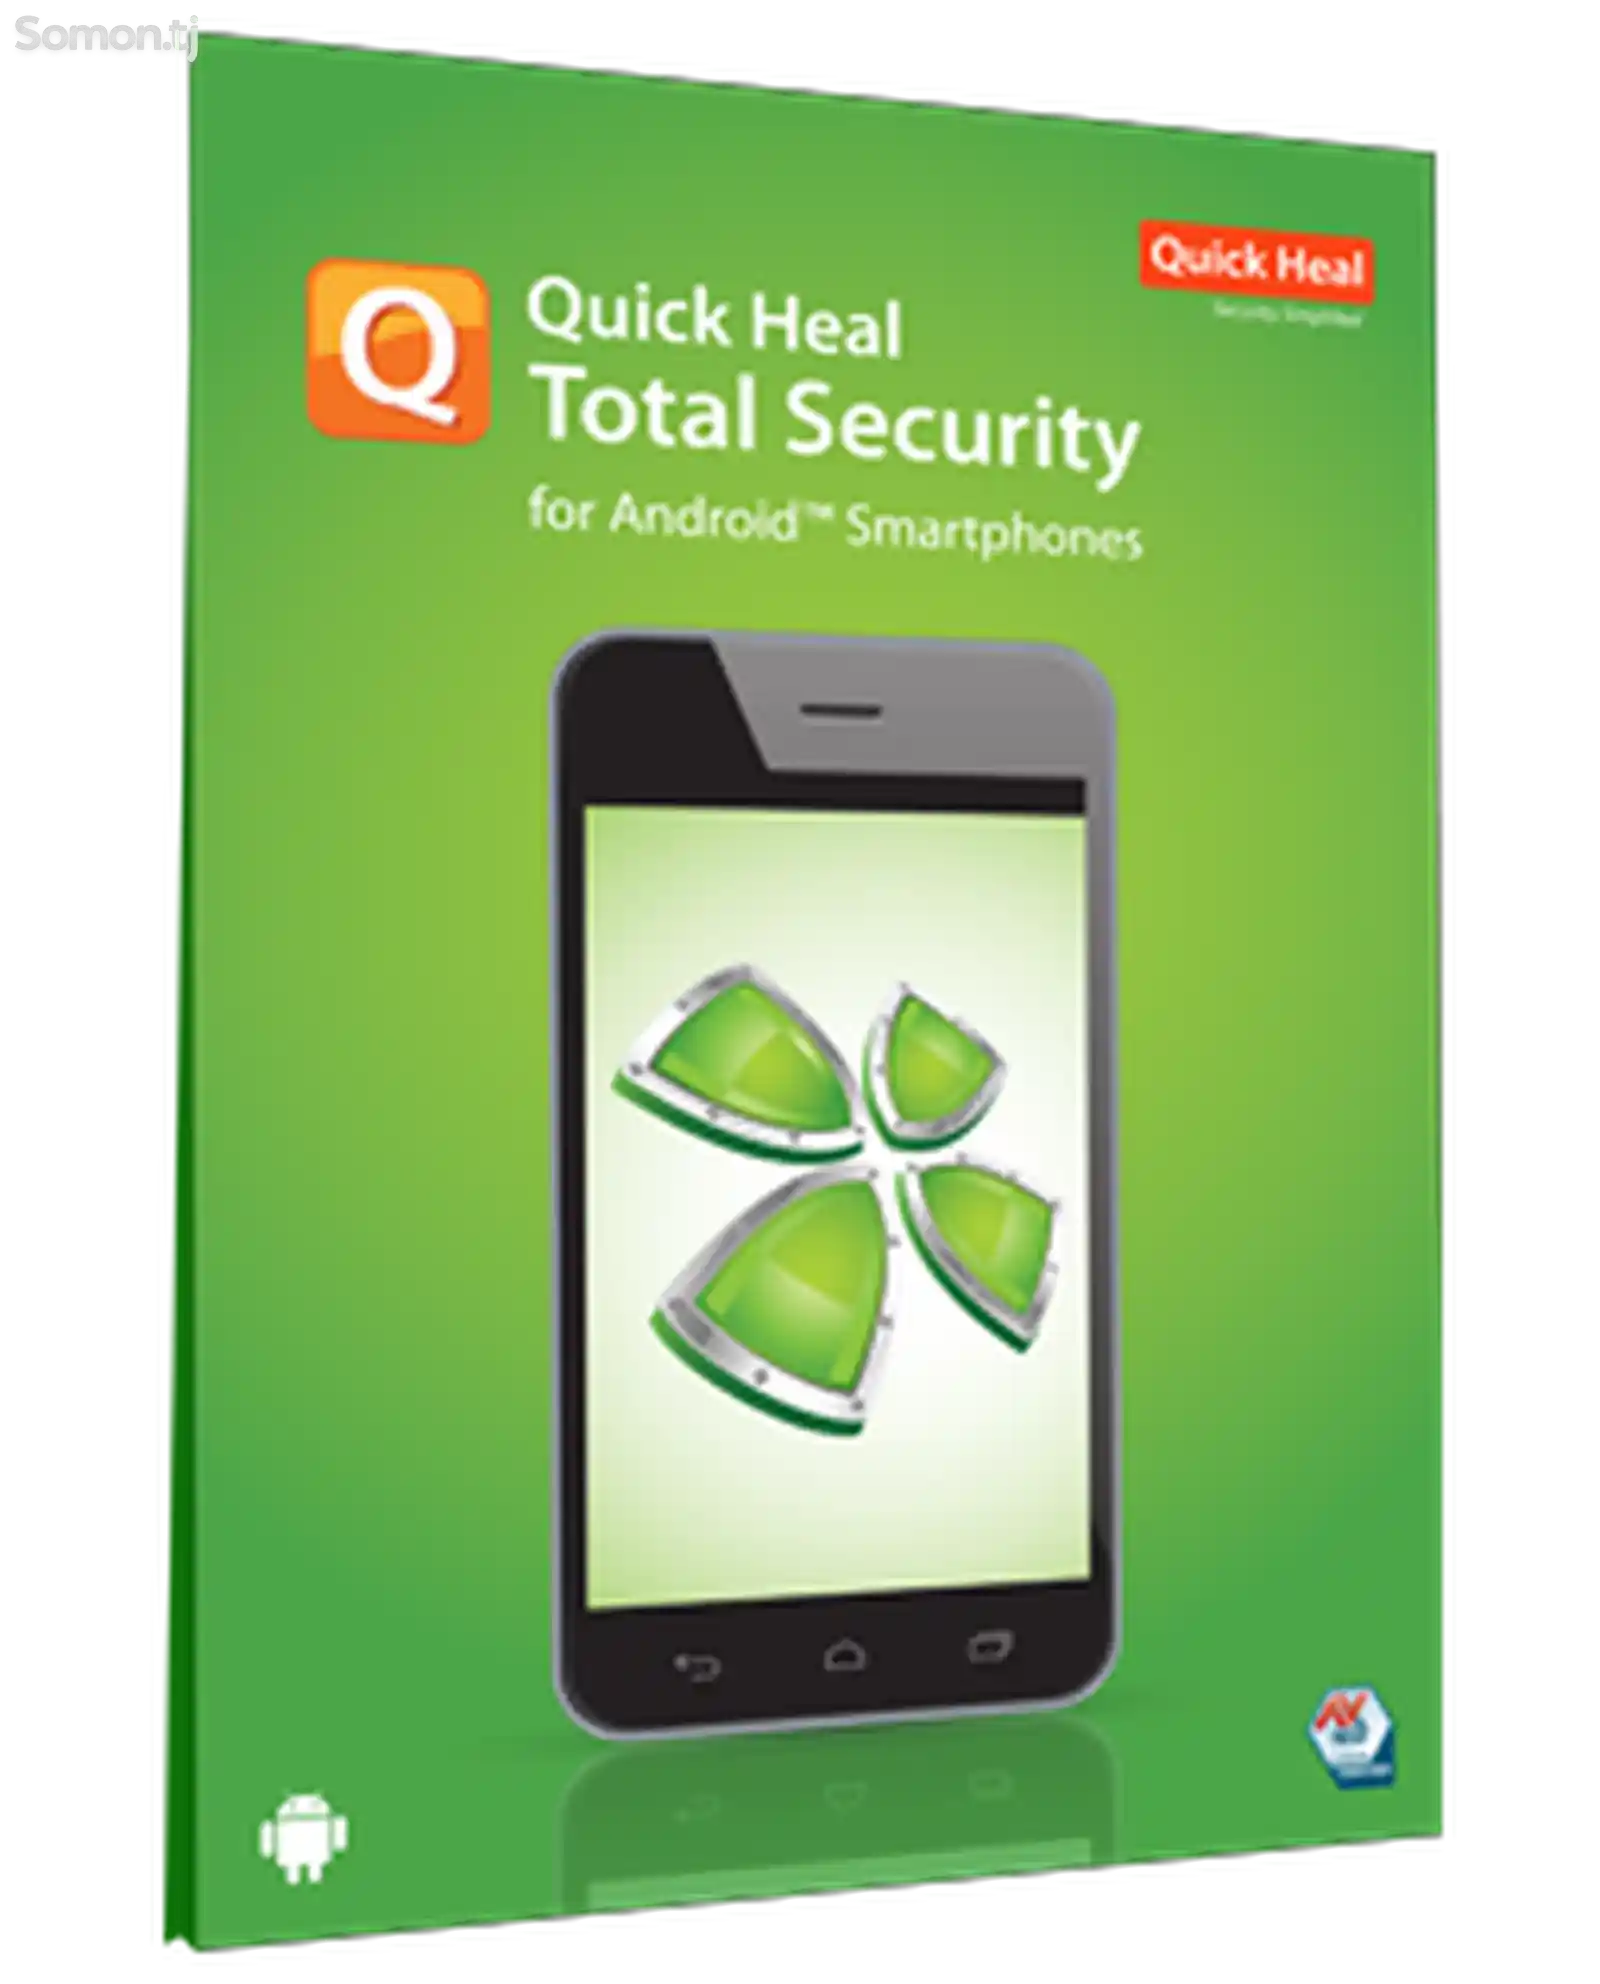 Quick Heal Mobile Security for Android - иҷозатнома барои 1 мобайл